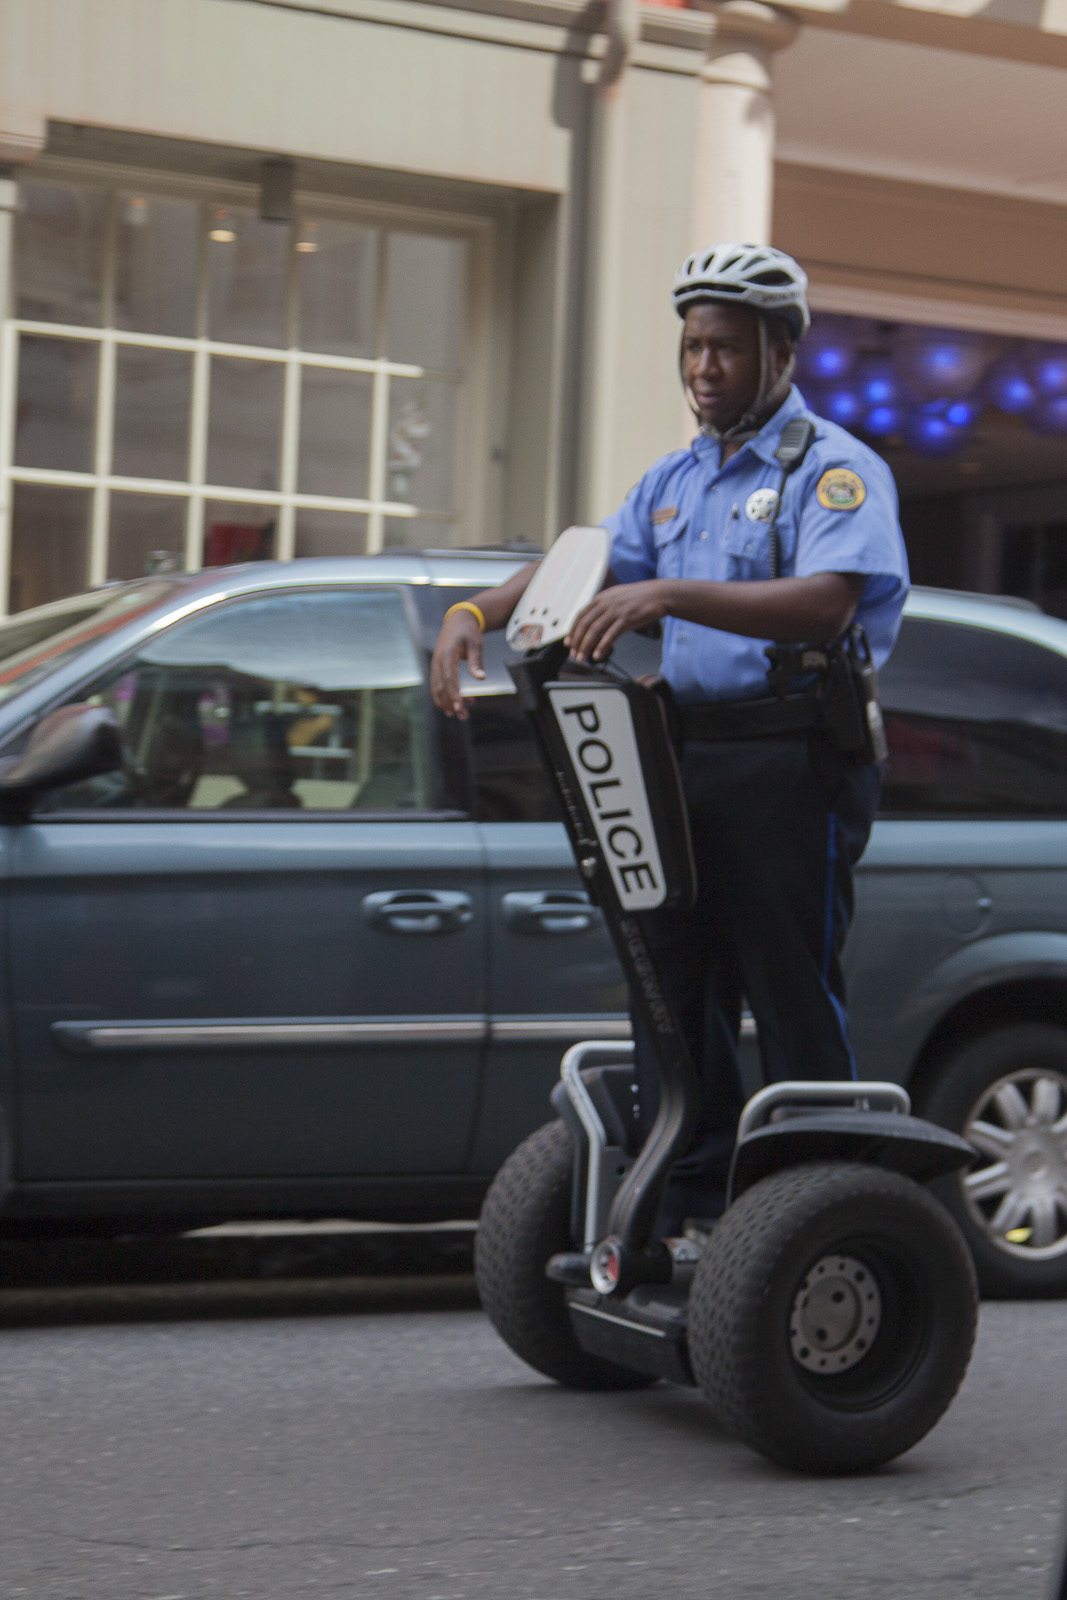 Mobile policing in New Orleans